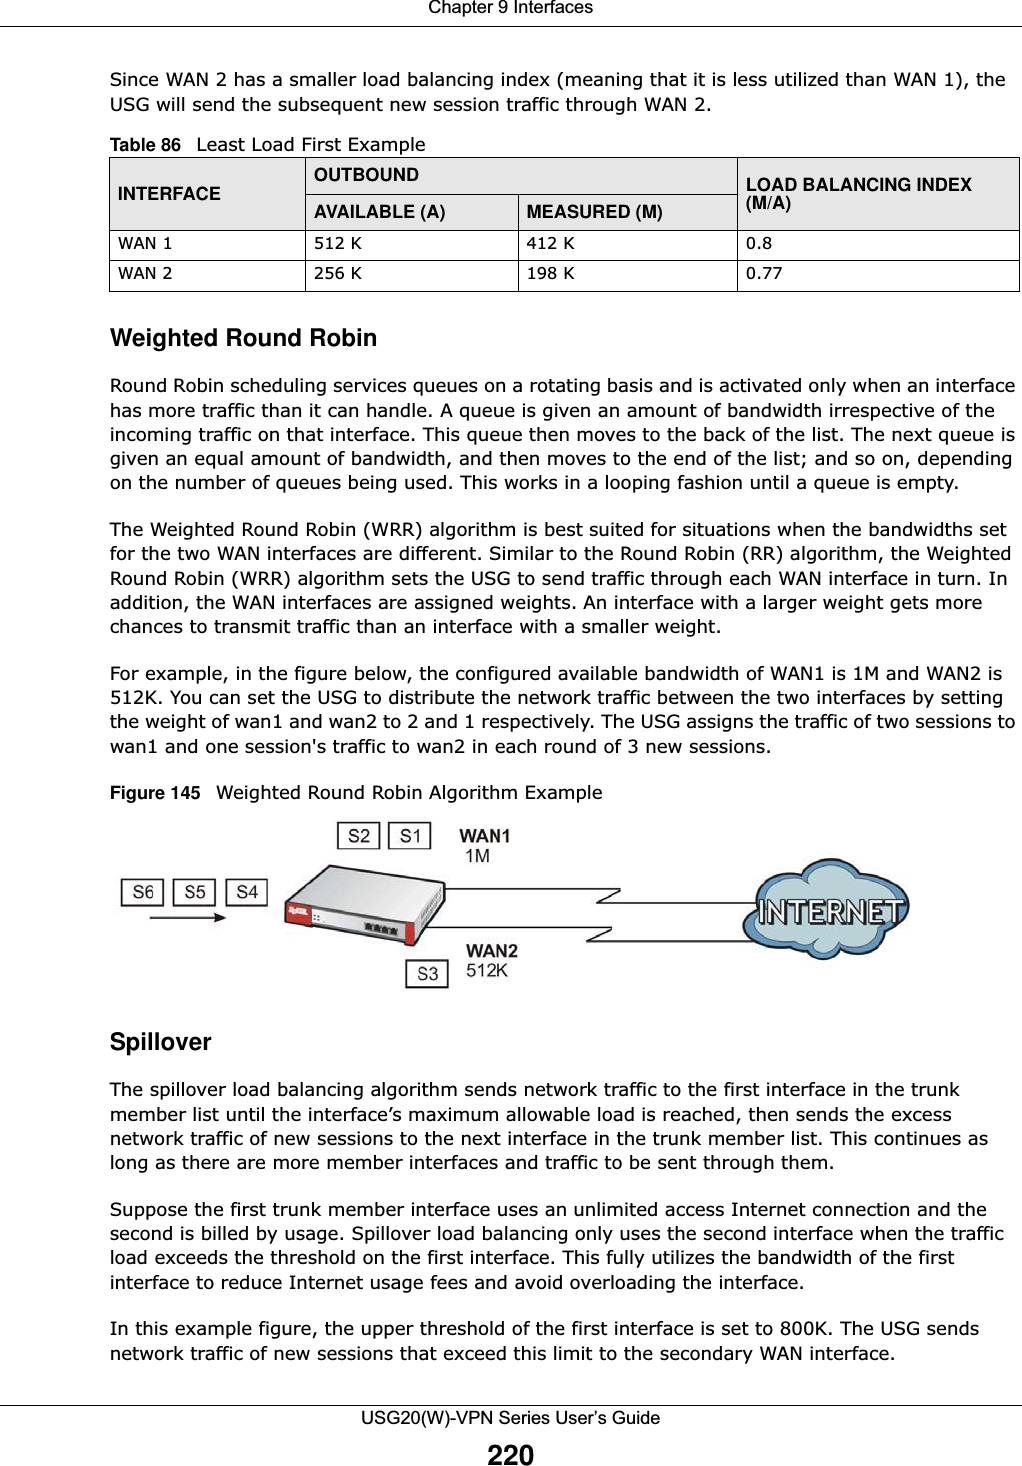 Chapter 9 InterfacesUSG20(W)-VPN Series User’s Guide220Since WAN 2 has a smaller load balancing index (meaning that it is less utilized than WAN 1), the USG will send the subsequent new session traffic through WAN 2.Weighted Round Robin Round Robin scheduling services queues on a rotating basis and is activated only when an interface has more traffic than it can handle. A queue is given an amount of bandwidth irrespective of the incoming traffic on that interface. This queue then moves to the back of the list. The next queue is given an equal amount of bandwidth, and then moves to the end of the list; and so on, depending on the number of queues being used. This works in a looping fashion until a queue is empty.The Weighted Round Robin (WRR) algorithm is best suited for situations when the bandwidths set for the two WAN interfaces are different. Similar to the Round Robin (RR) algorithm, the Weighted Round Robin (WRR) algorithm sets the USG to send traffic through each WAN interface in turn. In addition, the WAN interfaces are assigned weights. An interface with a larger weight gets more chances to transmit traffic than an interface with a smaller weight.For example, in the figure below, the configured available bandwidth of WAN1 is 1M and WAN2 is 512K. You can set the USG to distribute the network traffic between the two interfaces by setting the weight of wan1 and wan2 to 2 and 1 respectively. The USG assigns the traffic of two sessions to wan1 and one session&apos;s traffic to wan2 in each round of 3 new sessions.Figure 145   Weighted Round Robin Algorithm ExampleSpilloverThe spillover load balancing algorithm sends network traffic to the first interface in the trunk member list until the interface’s maximum allowable load is reached, then sends the excess network traffic of new sessions to the next interface in the trunk member list. This continues as long as there are more member interfaces and traffic to be sent through them.Suppose the first trunk member interface uses an unlimited access Internet connection and the second is billed by usage. Spillover load balancing only uses the second interface when the traffic load exceeds the threshold on the first interface. This fully utilizes the bandwidth of the first interface to reduce Internet usage fees and avoid overloading the interface.In this example figure, the upper threshold of the first interface is set to 800K. The USG sends network traffic of new sessions that exceed this limit to the secondary WAN interface.Table 86   Least Load First Example INTERFACE OUTBOUND LOAD BALANCING INDEX (M/A)AVAILABLE (A) MEASURED (M) WAN 1 512 K 412 K 0.8WAN 2 256 K  198 K 0.77